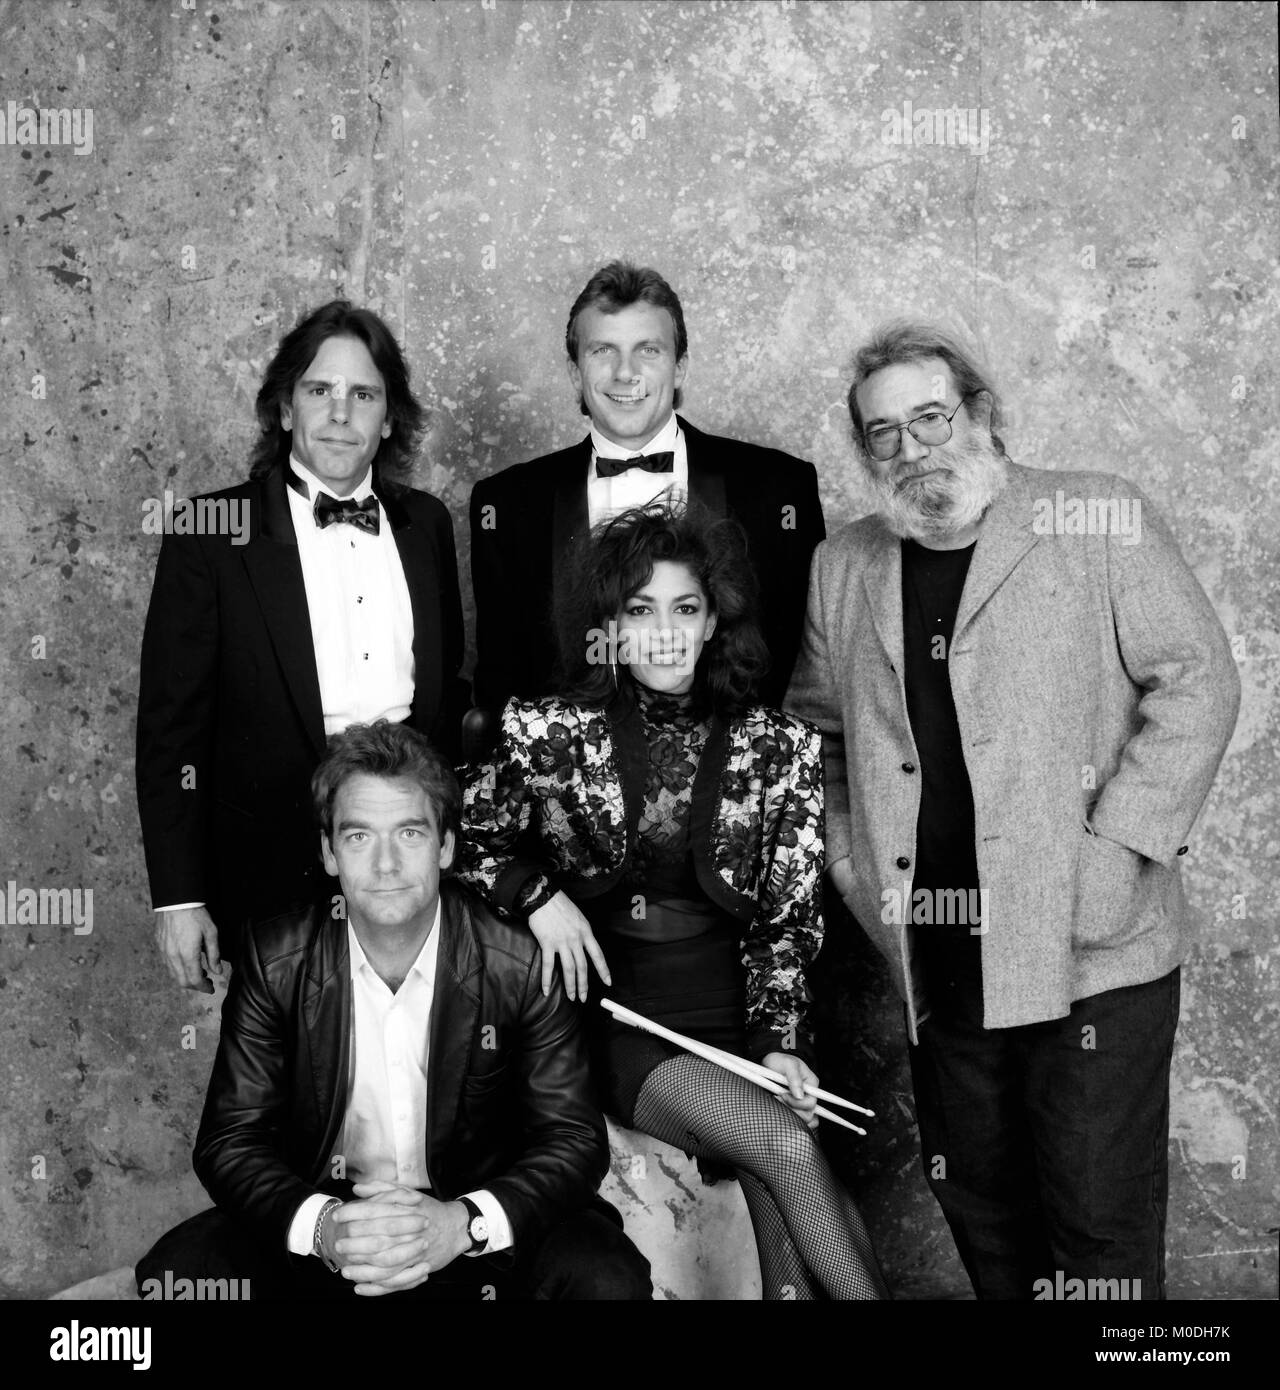 Huey Lewis, Sheila E, Joe Montana and Jerry Garcia picutred at the 1988 Bay Area Music Awards Credit: Pat Johnson/MediaPunch Stock Photo